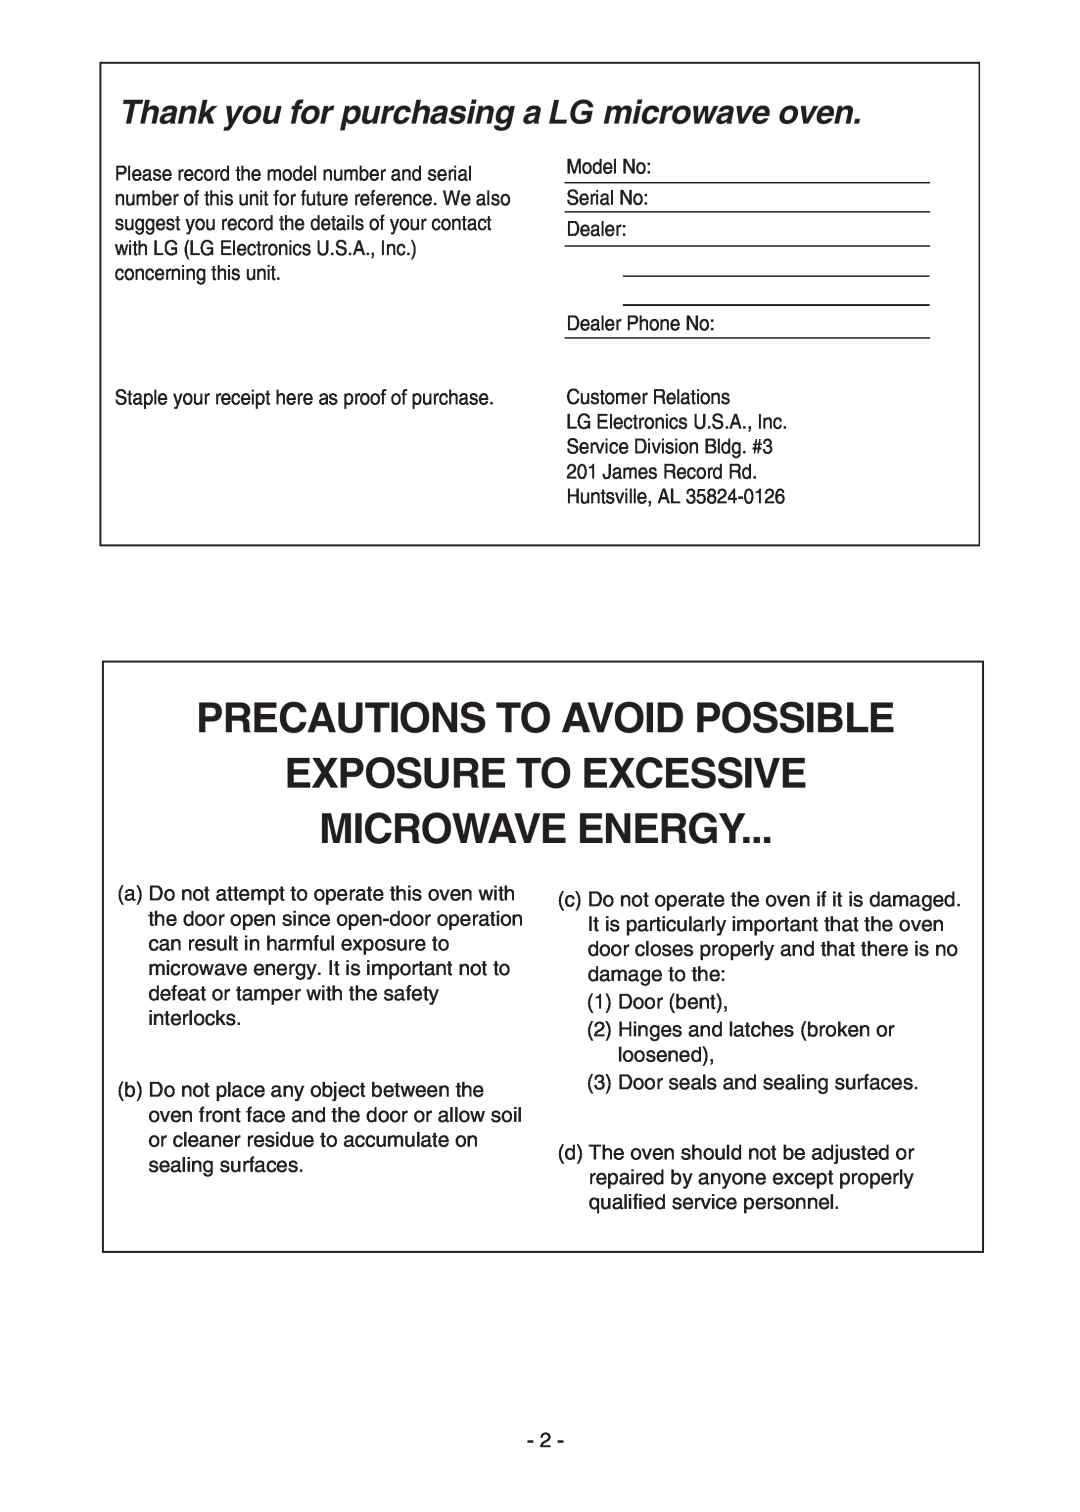 LG Electronics LMV1683ST manual Precautions To Avoid Possible, Exposure To Excessive Microwave Energy 